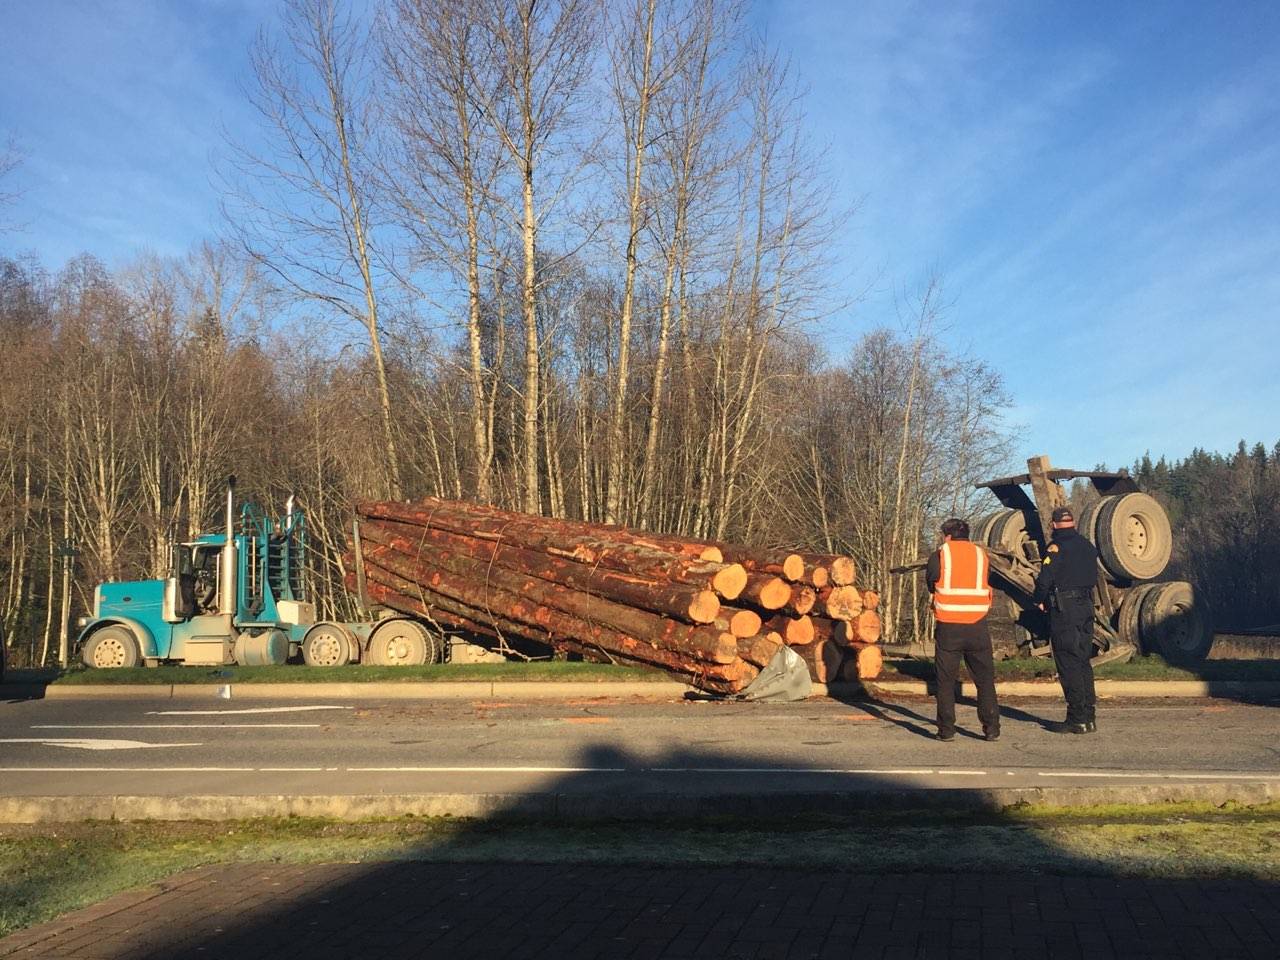 A photo of the log truck accident along SR 202 that closed the highway on the morning of Dec. 4, 2020. William Shaw/Snoqualmie Valley Record